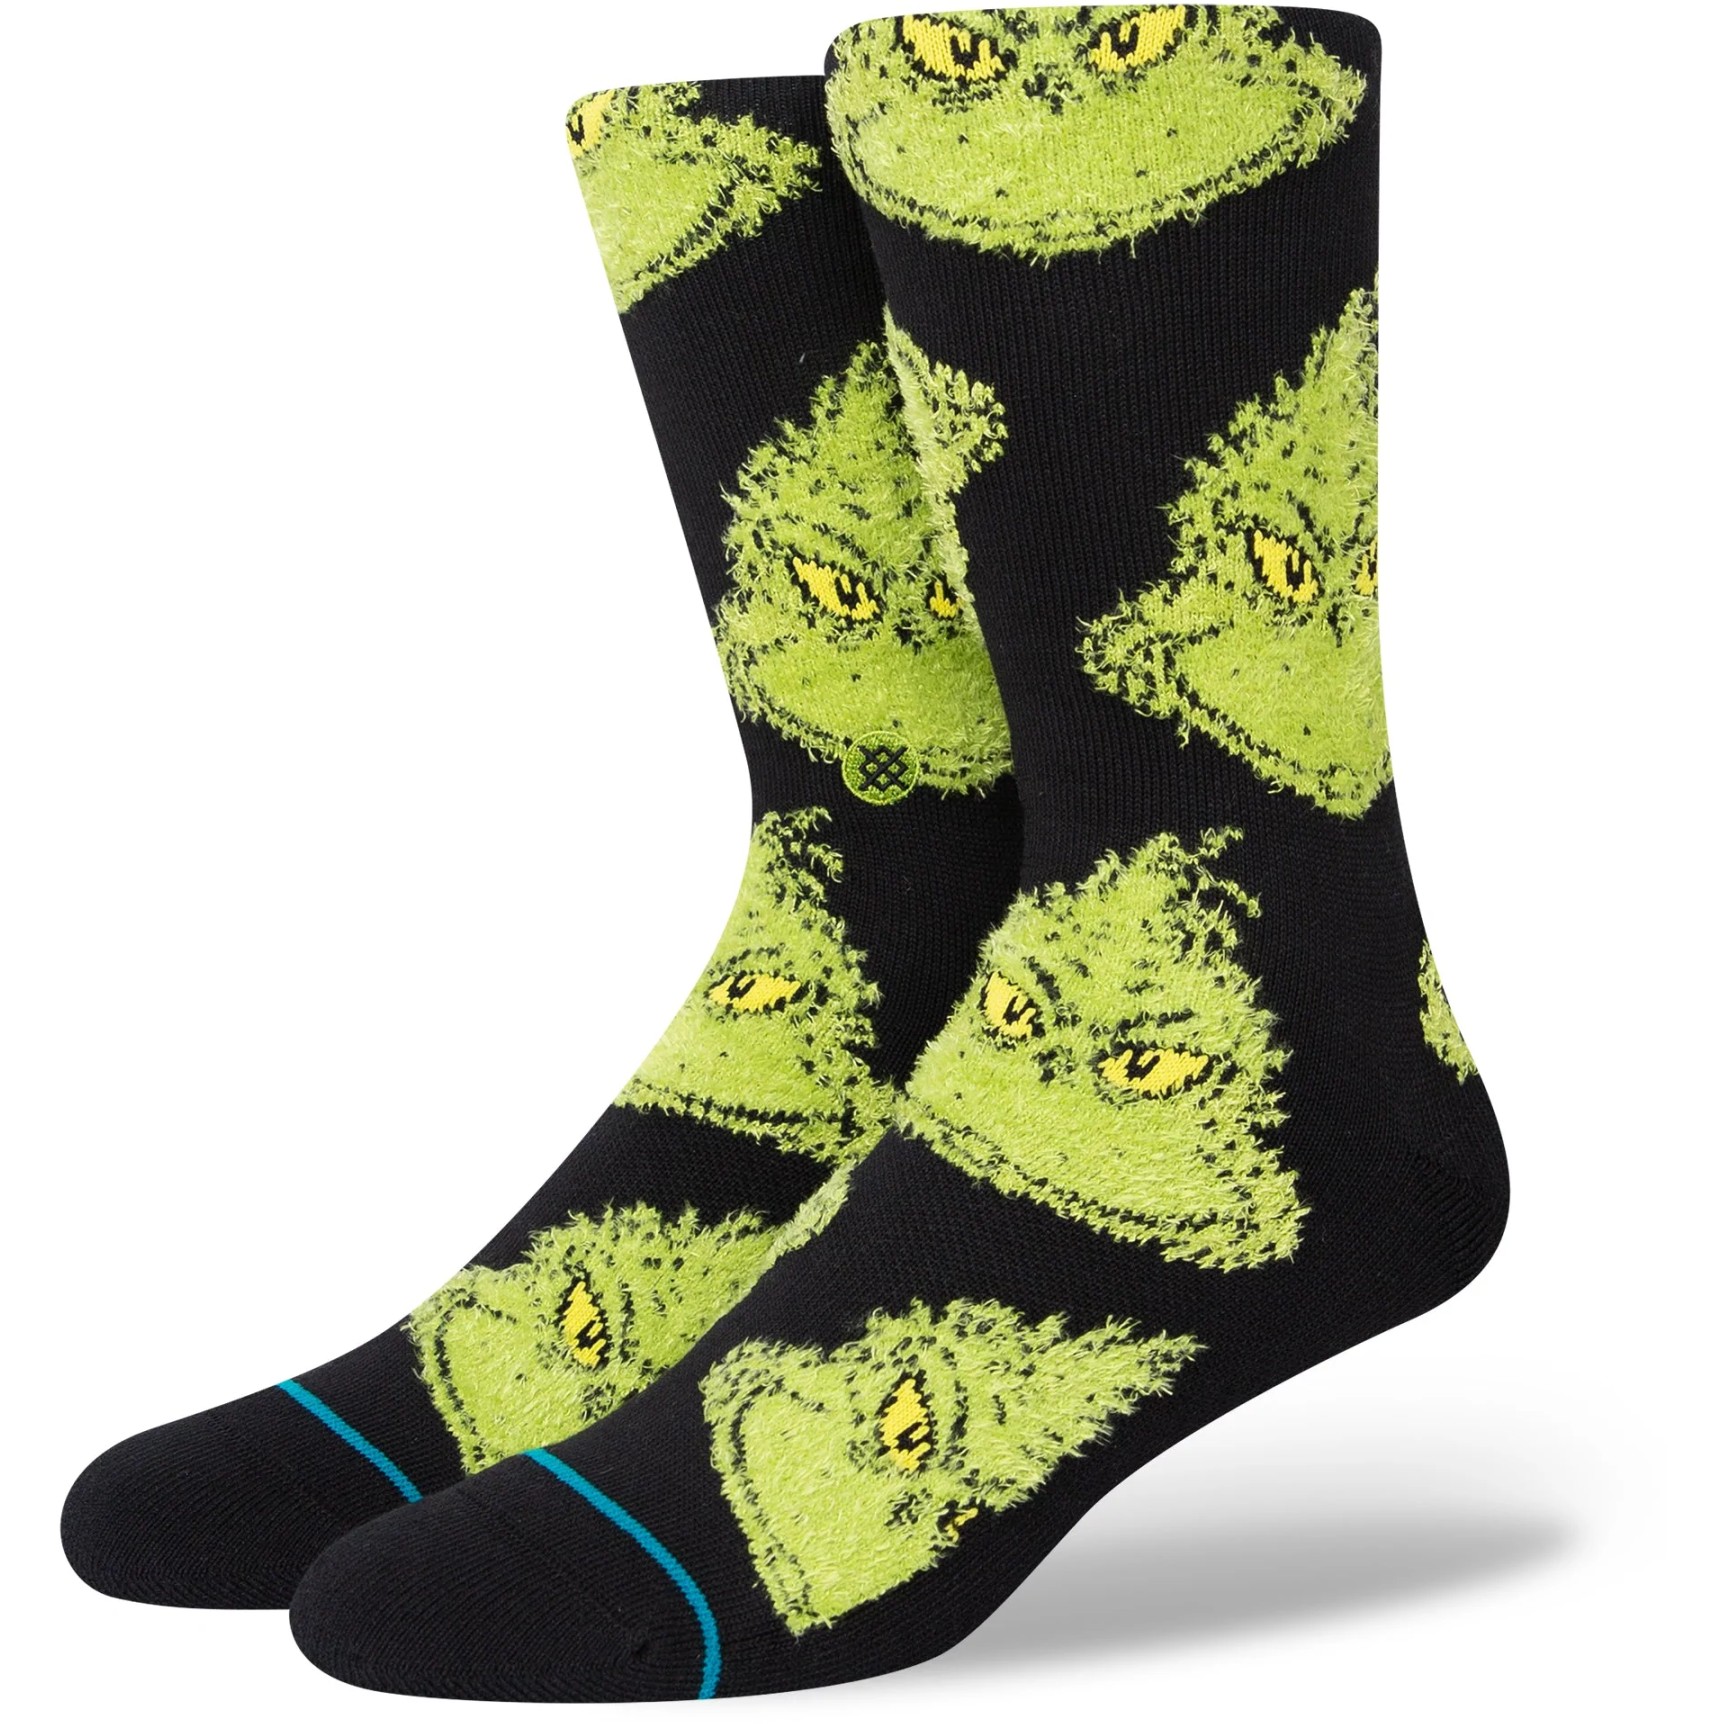 Picture of Stance Mean One Crew Socks Unisex - black